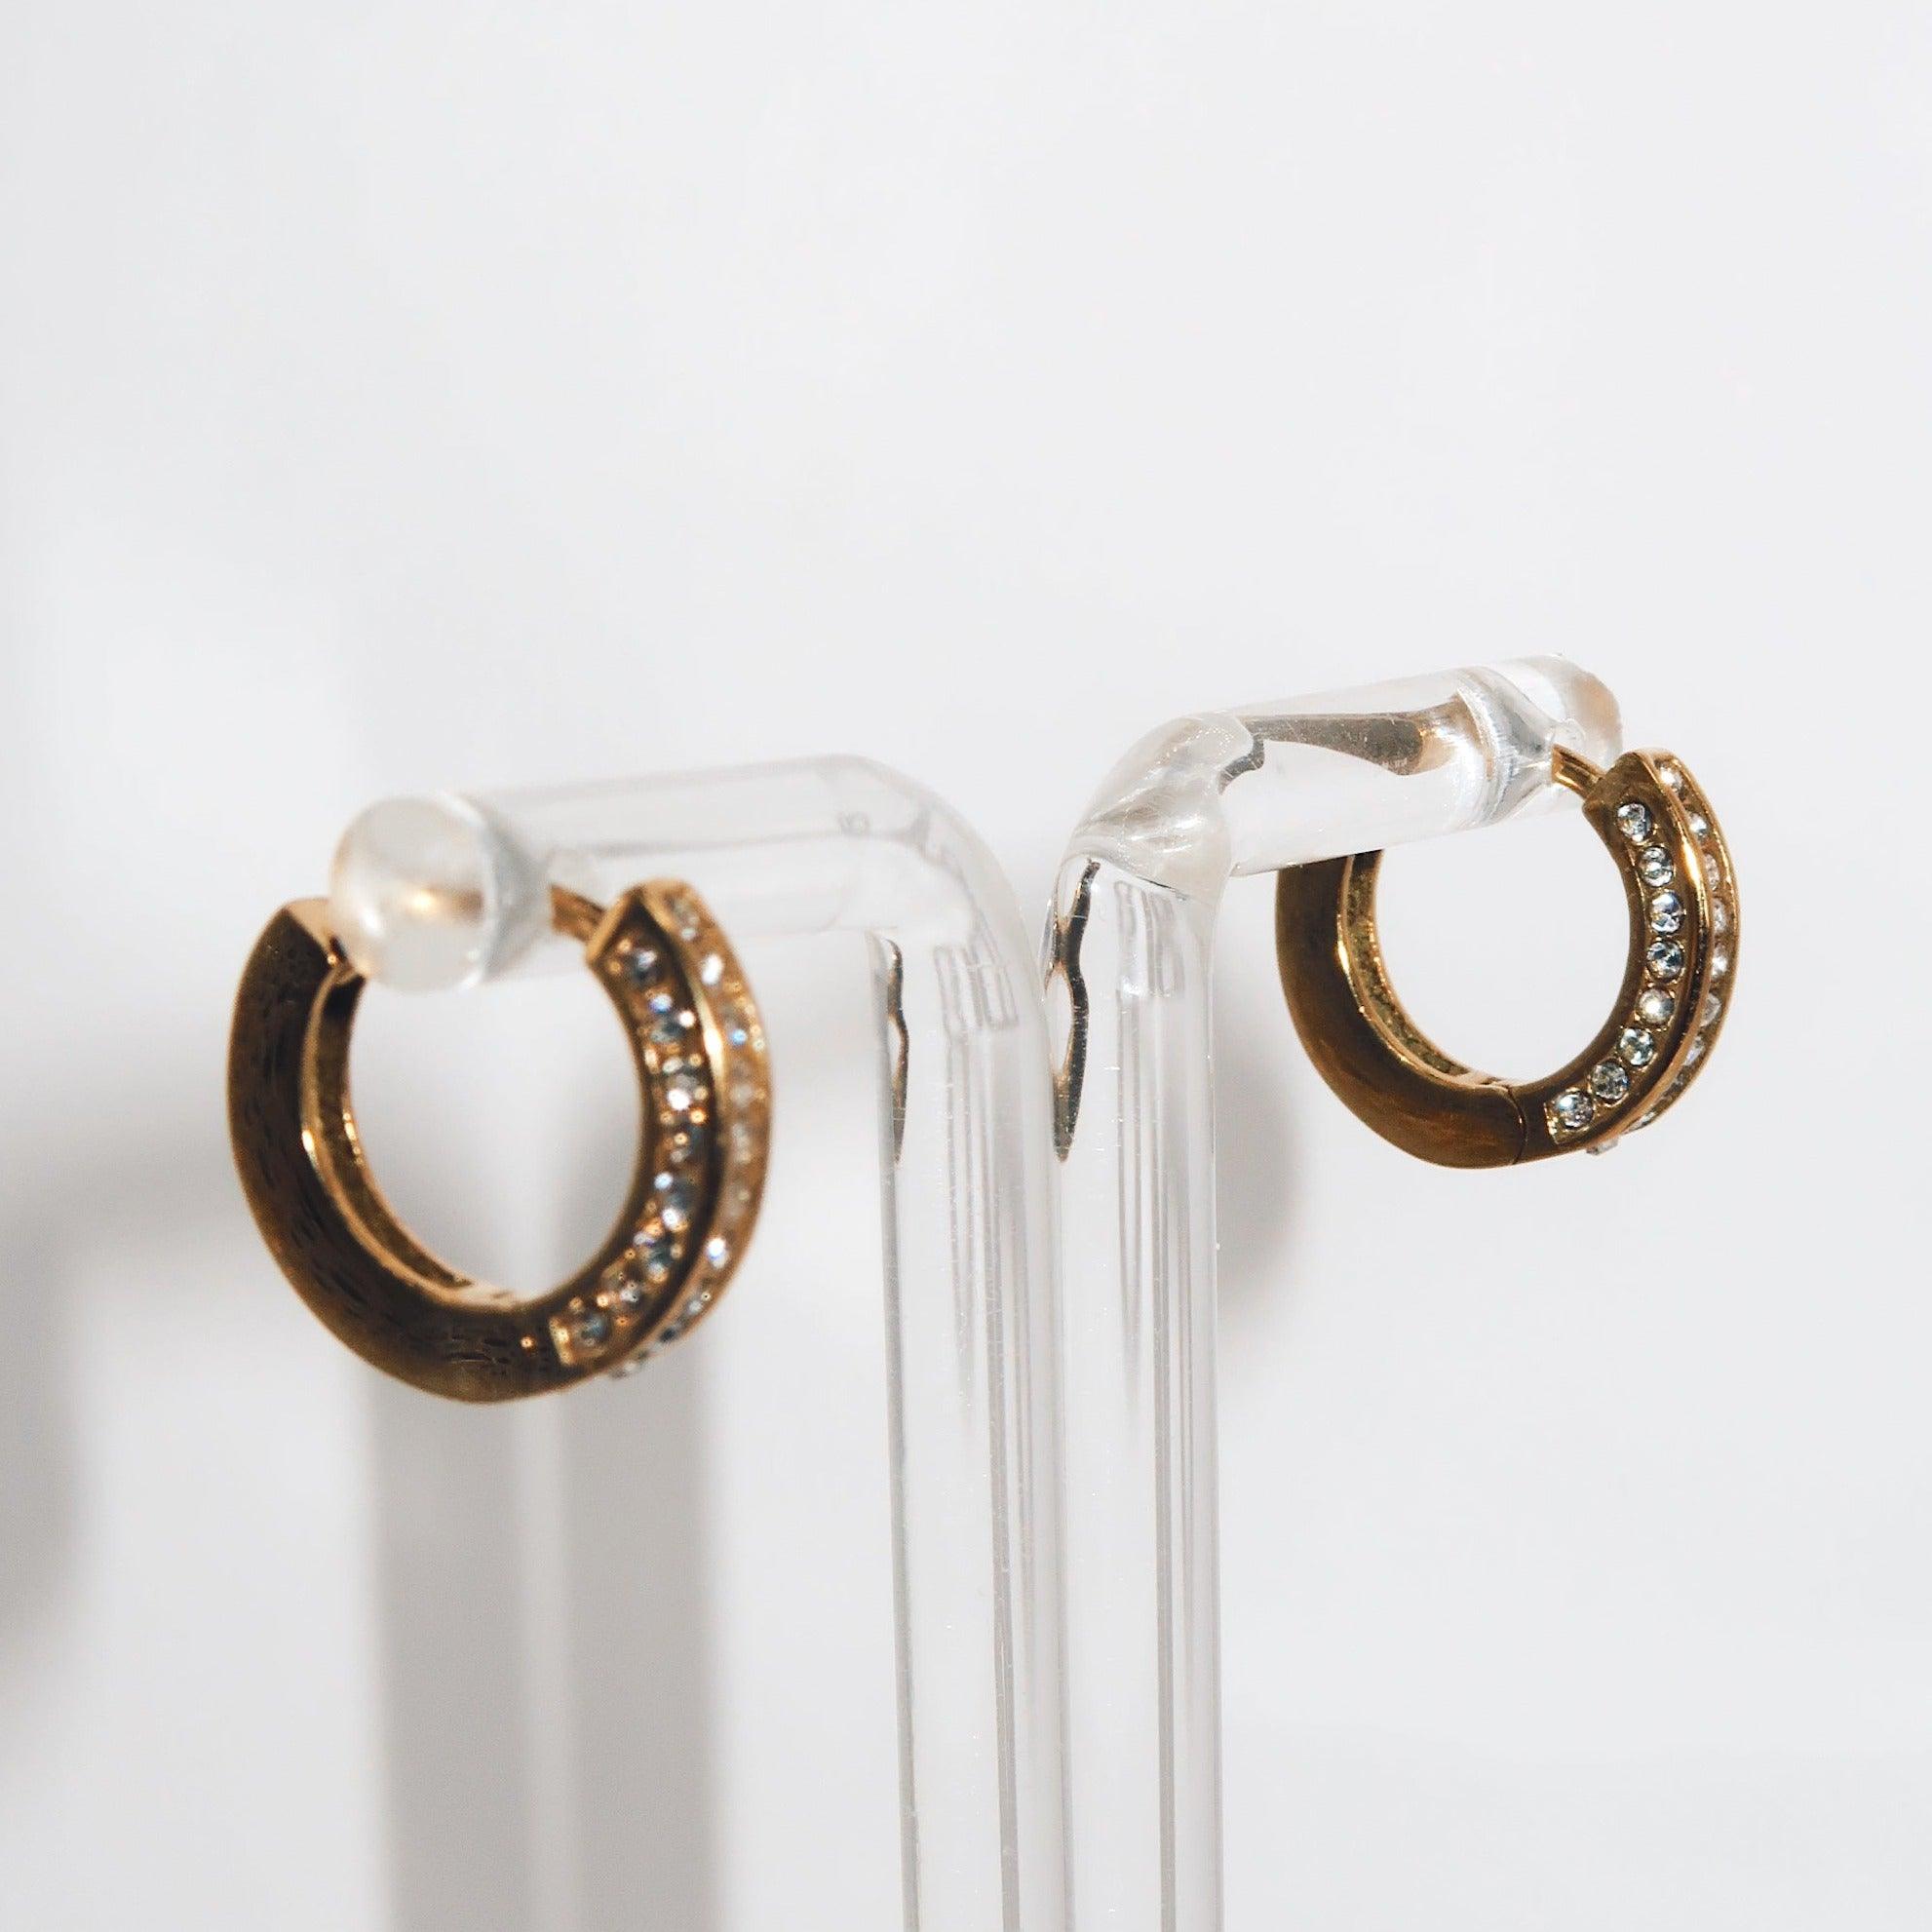 KIMBERLY - 18K PVD Gold Plated Small Hoop Earrings with CZ Stones - Mixed Metals